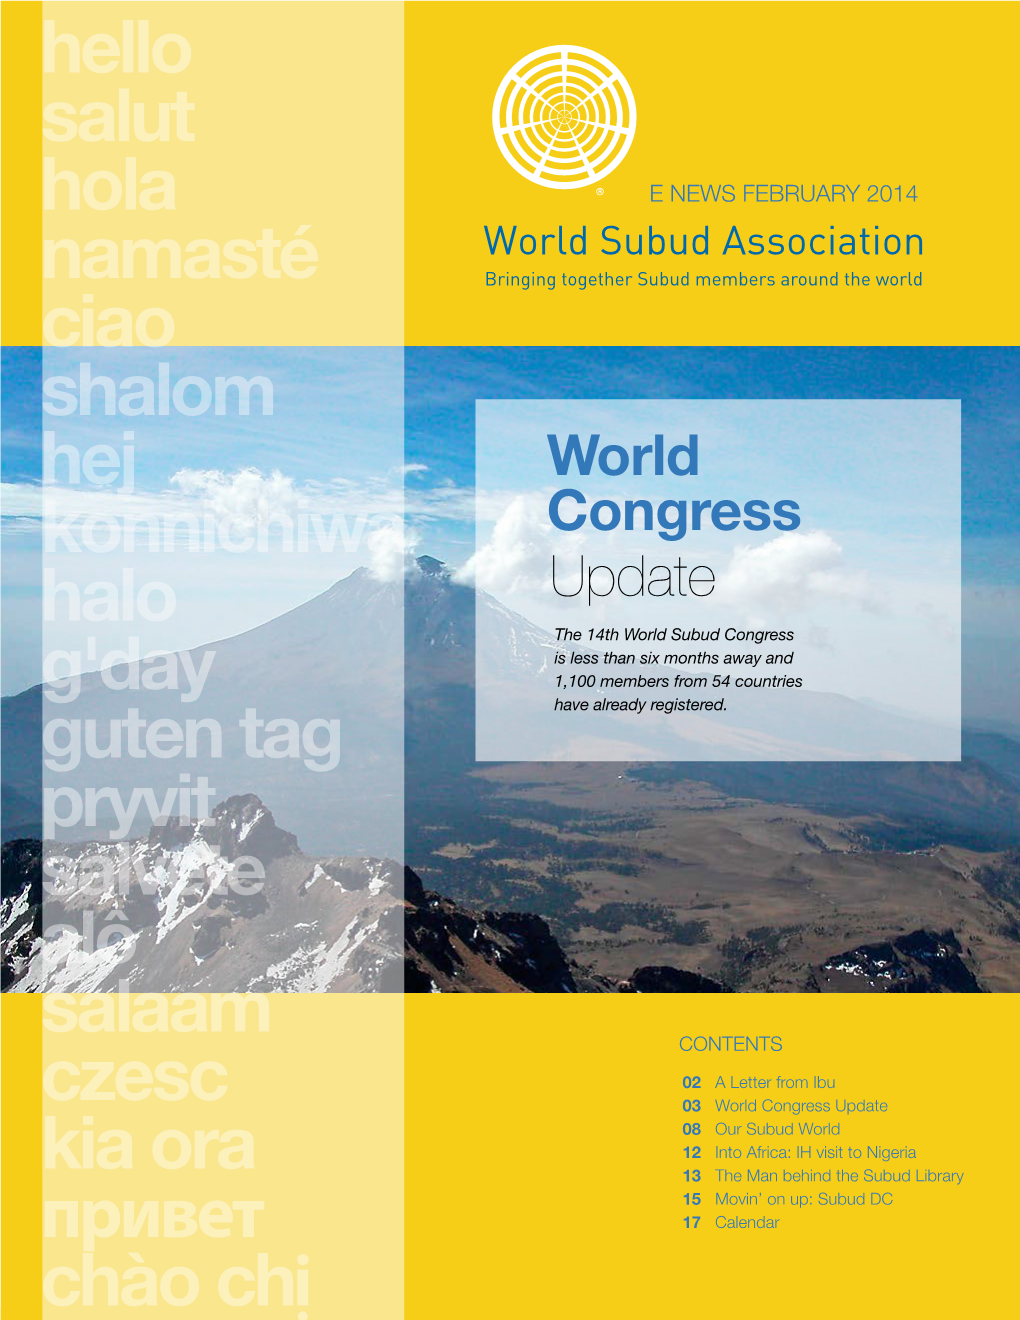 Update the 14Th World Subud Congress Is Less Than Six Months Away and 1,100 Members from 54 Countries Have Already Registered